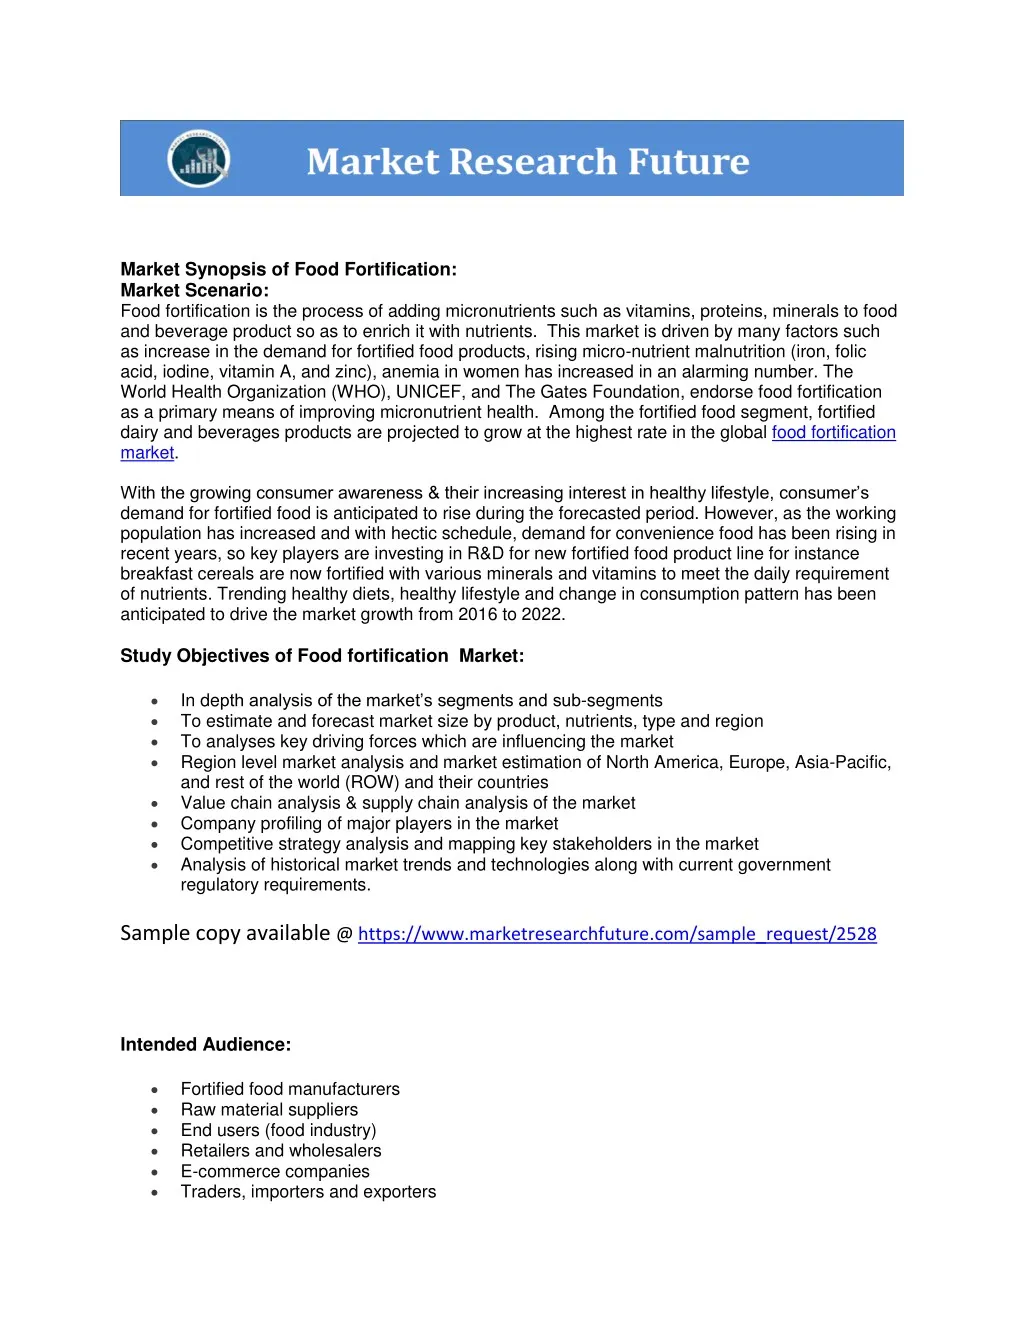 market synopsis of food fortification market